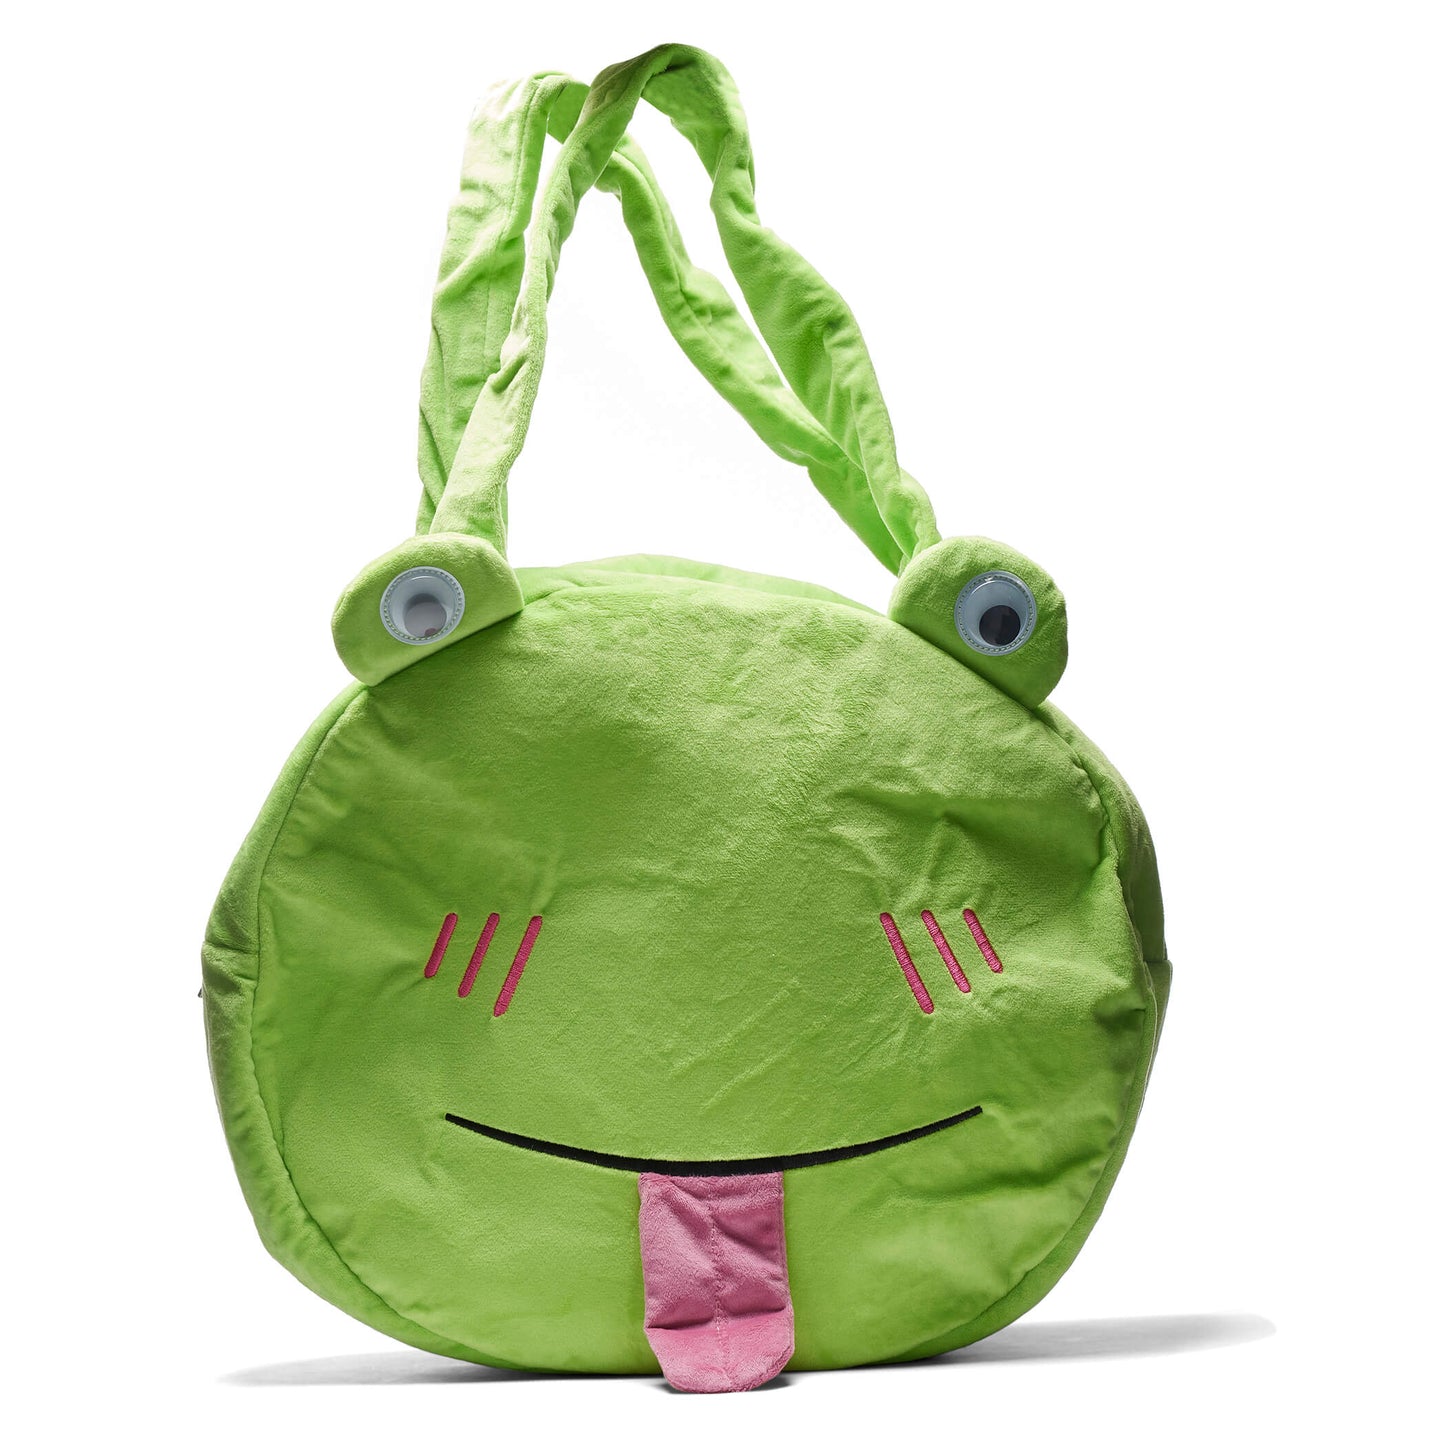 Bevvy the Frog Bag - Accessories - KOI Footwear - Green - Main View